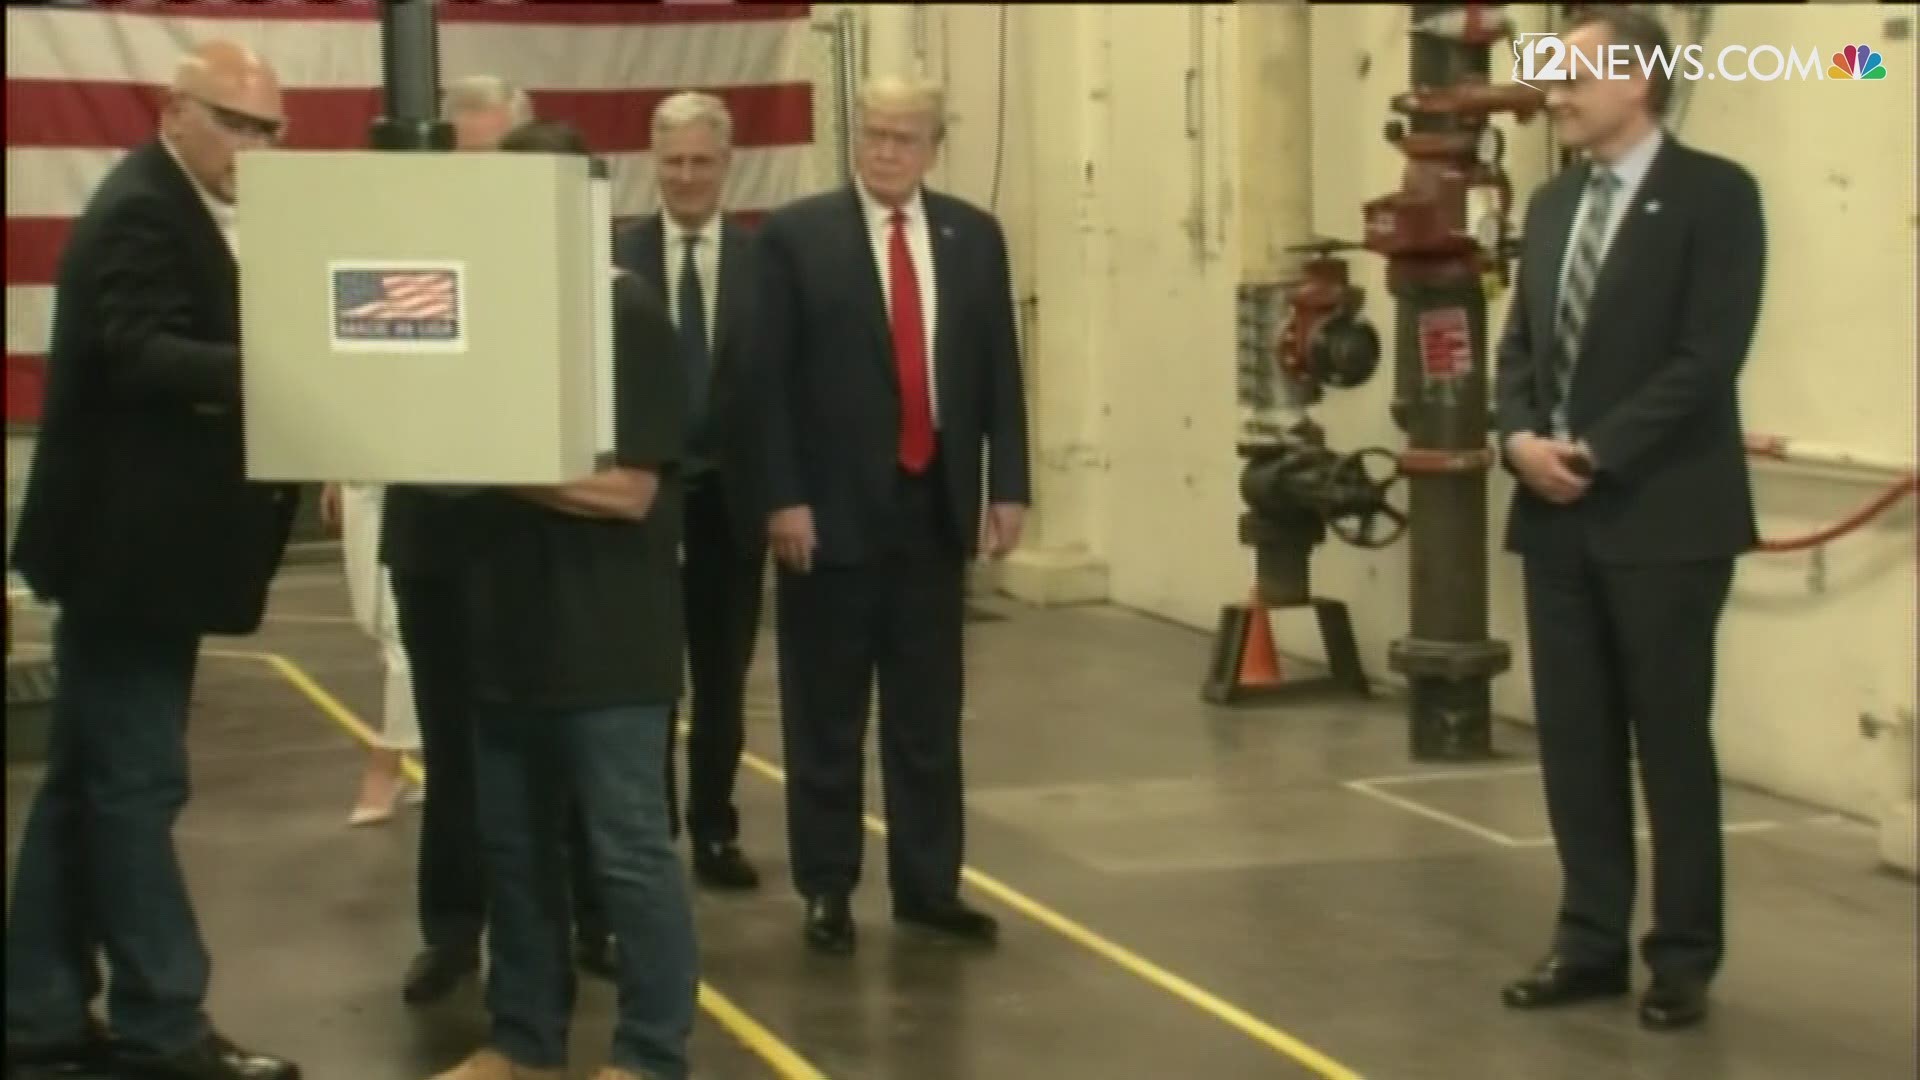 President Trump was in Phoenix Tuesday touring a Honeywell plant that is producing millions of N-95 masks. The plant was able to get up and running in five weeks.